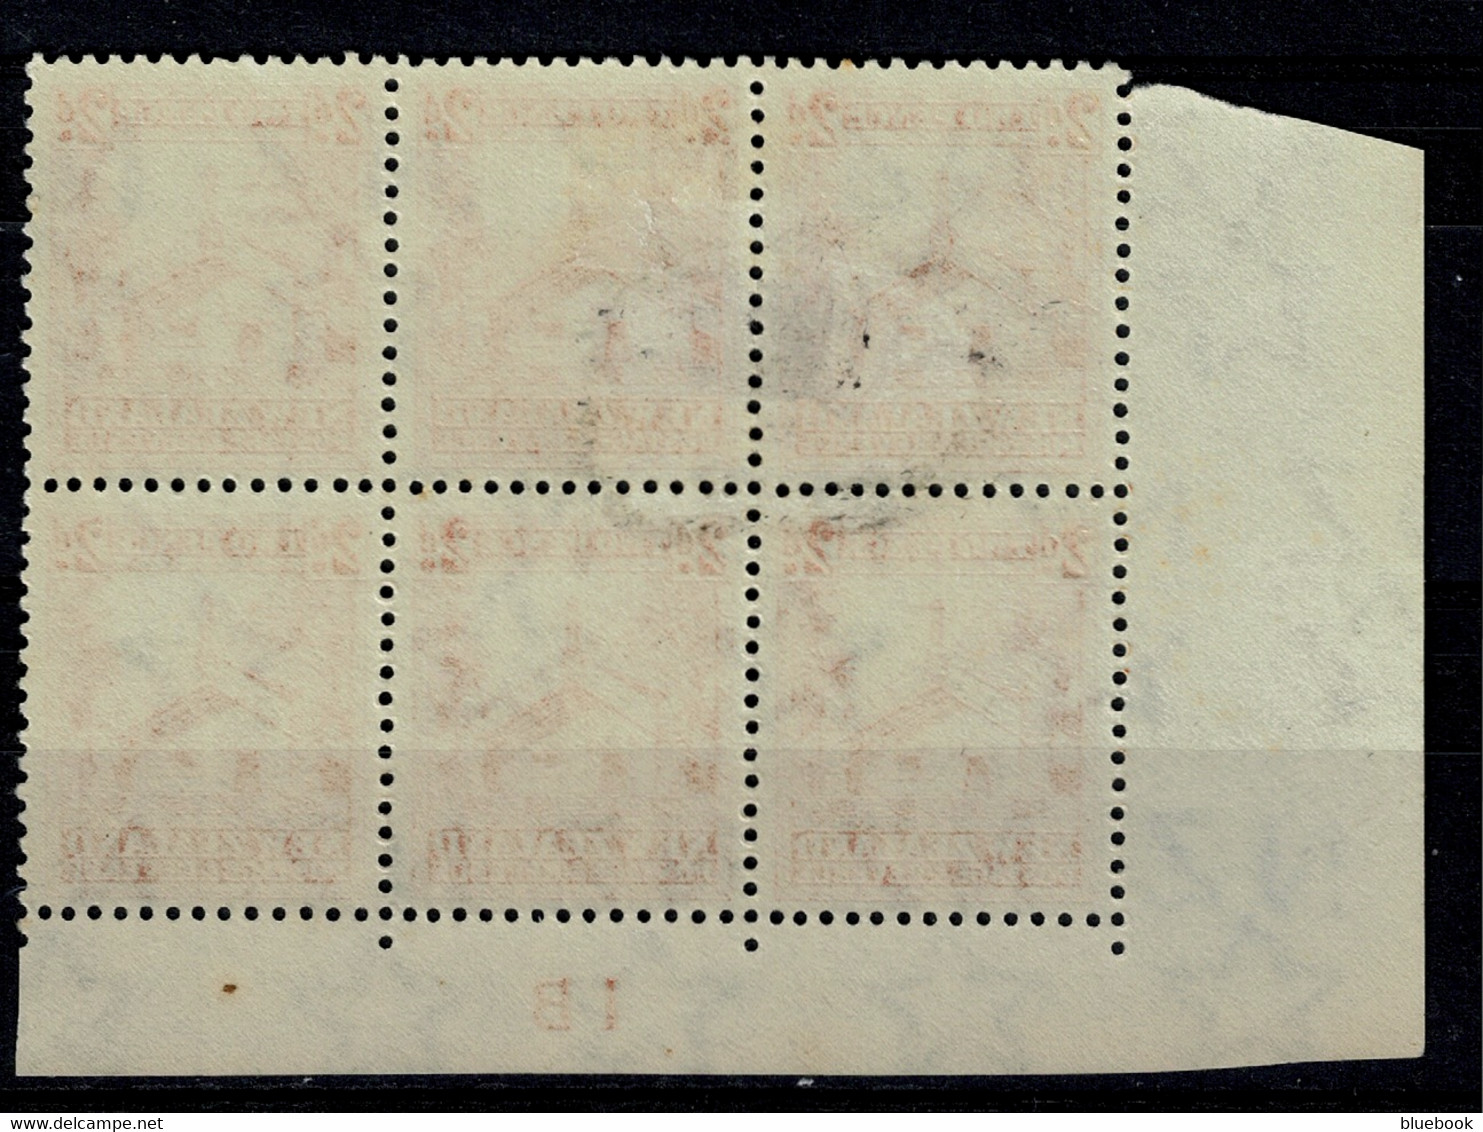 Ref 1569 - New Zealand 1936 - 2d Plate Block Of 6 MNH Stamps - SG 84 (Perf 14 X 13.5) - Unused Stamps